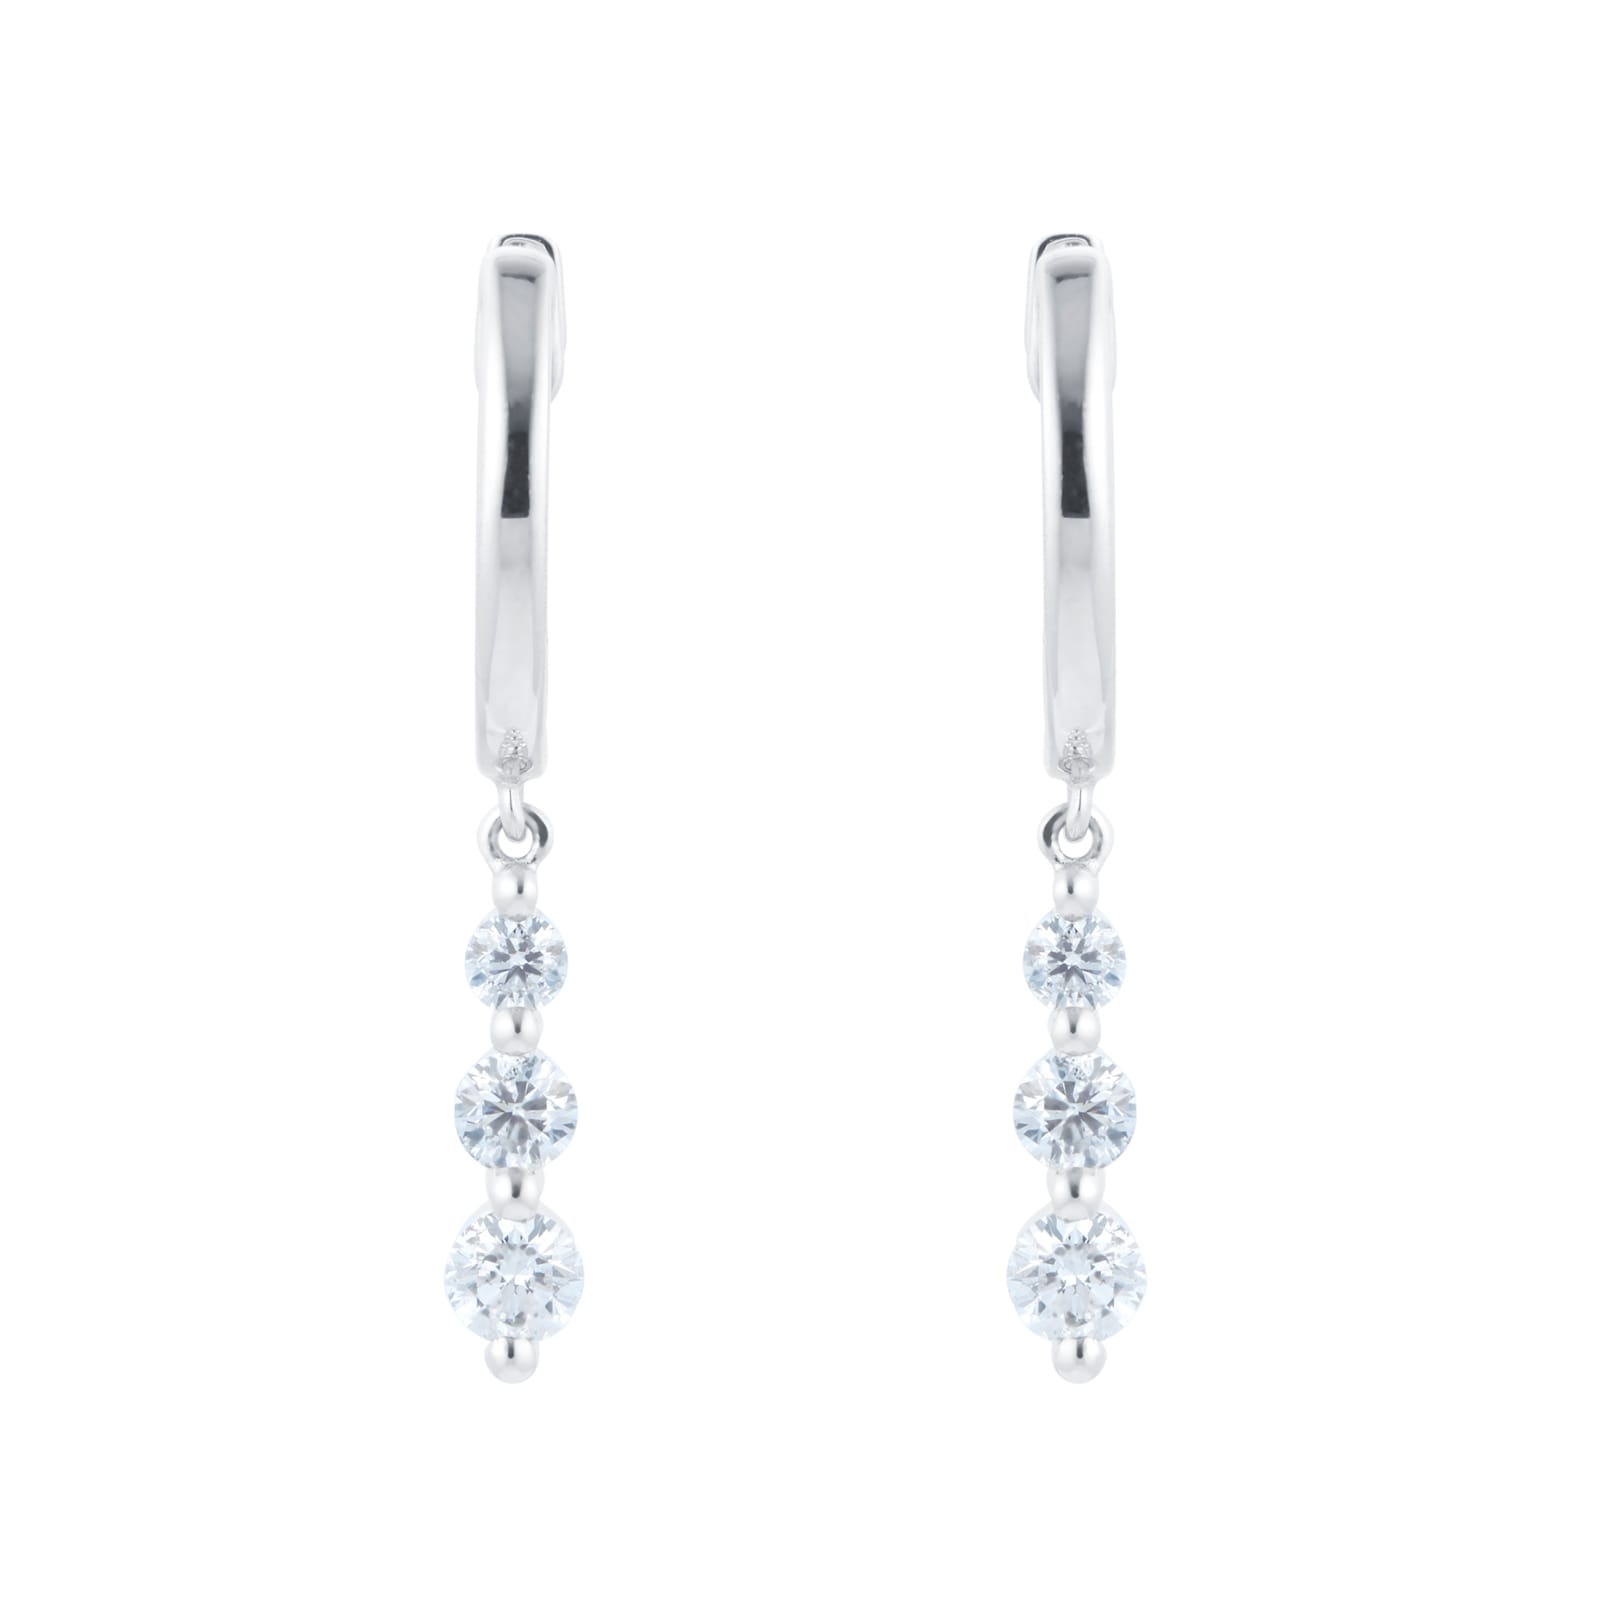 9ct White Gold 0.50cttw 3 Stone Stud Earrings